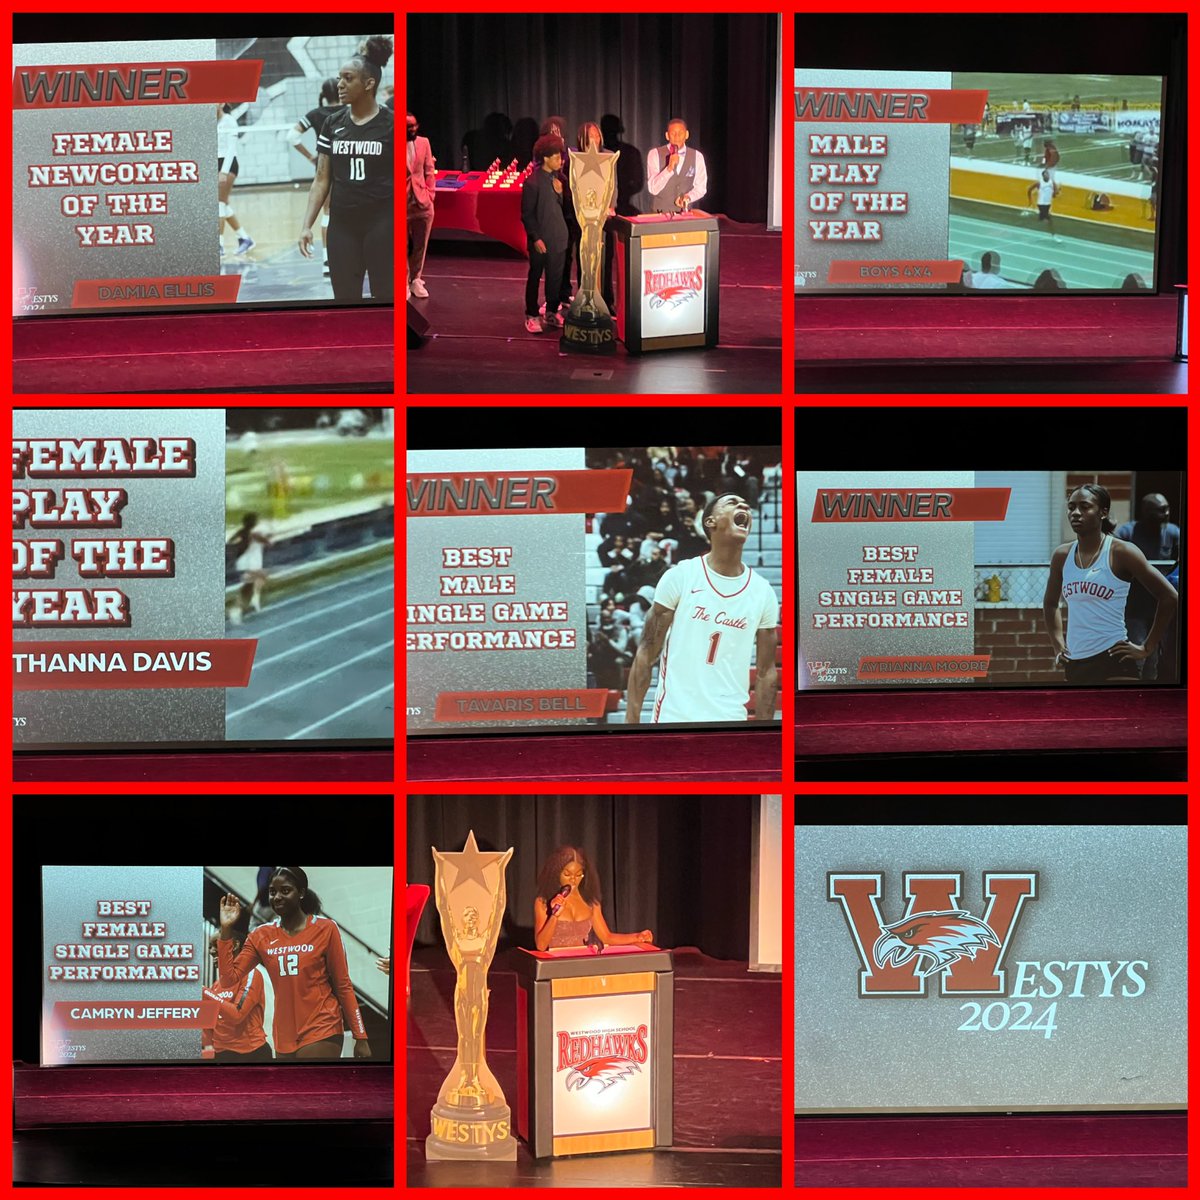 🎉 Congrats to all the honorees & recipients tonight during the Westy’s Athletic Recognition Ceremony! Your achievements continue to exemplify your hard work & dedication. 🏆👏 @WHS_Redhawks #RedCarpet #AthleticExcellence #GoRedhawks @RichlandTwo #Rowdy